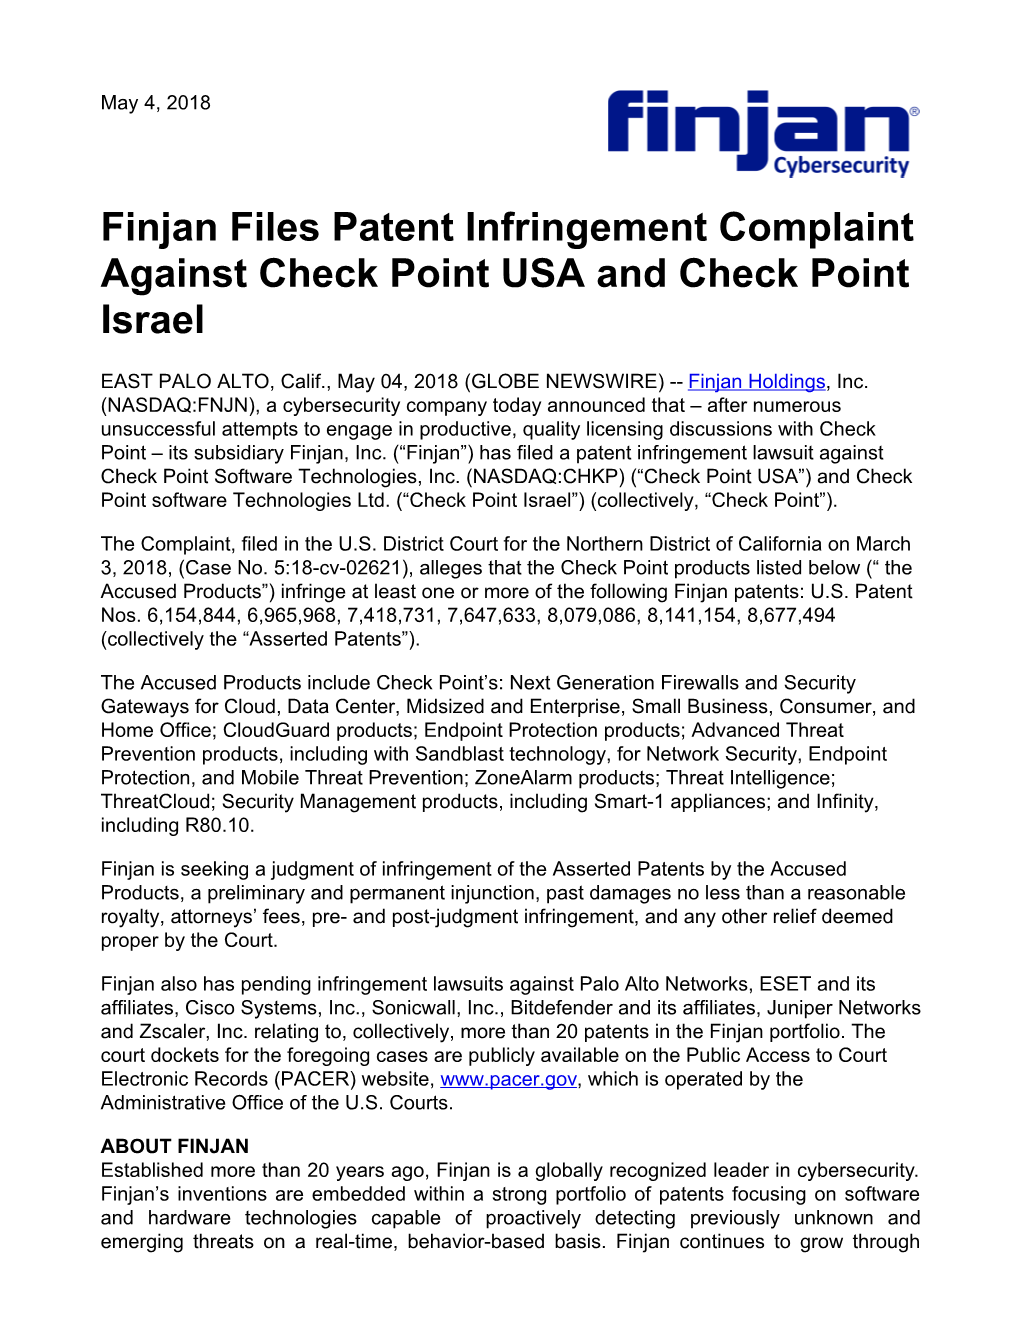 Finjan Files Patent Infringement Complaint Against Check Point USA and Check Point Israel